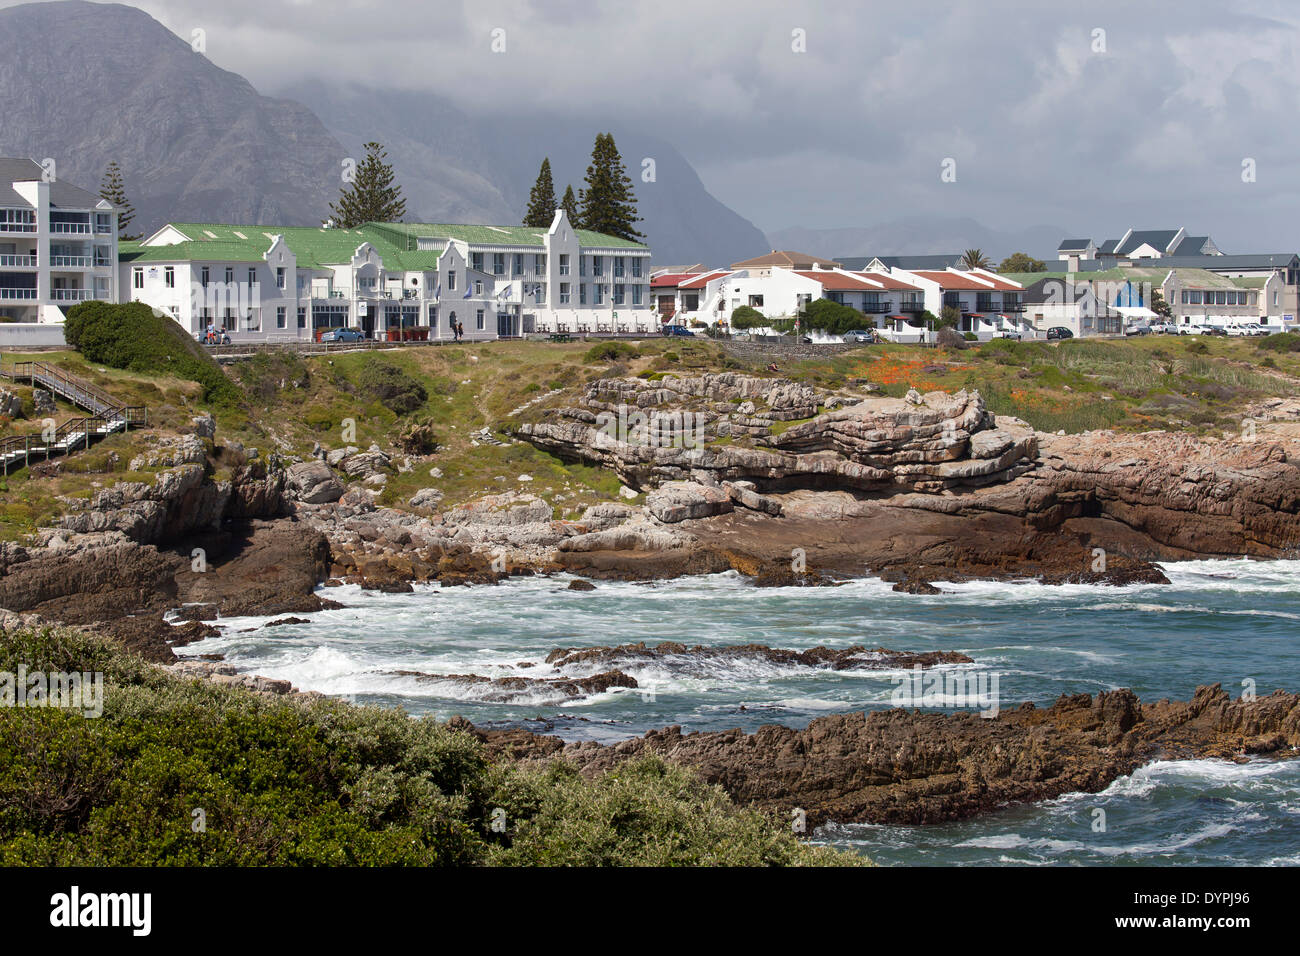 the rocky coast and Hotels at Hermanus, Western Cape, South Africa Stock Photo